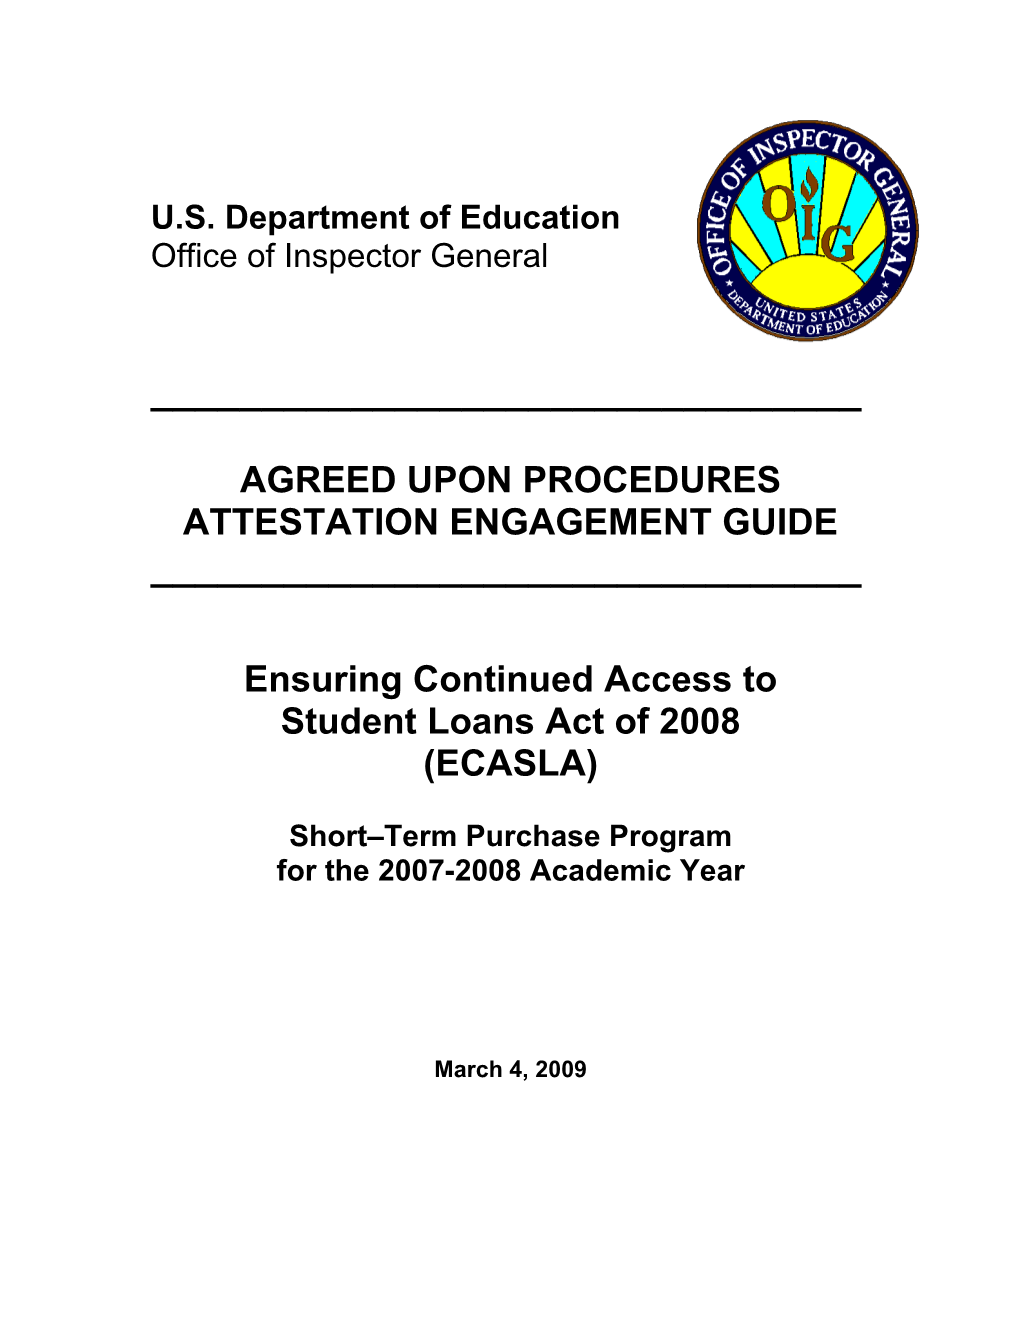 Agreed Upon Procedures (AUP) Attestation Engagement Guide for the Ensuring Continued Access